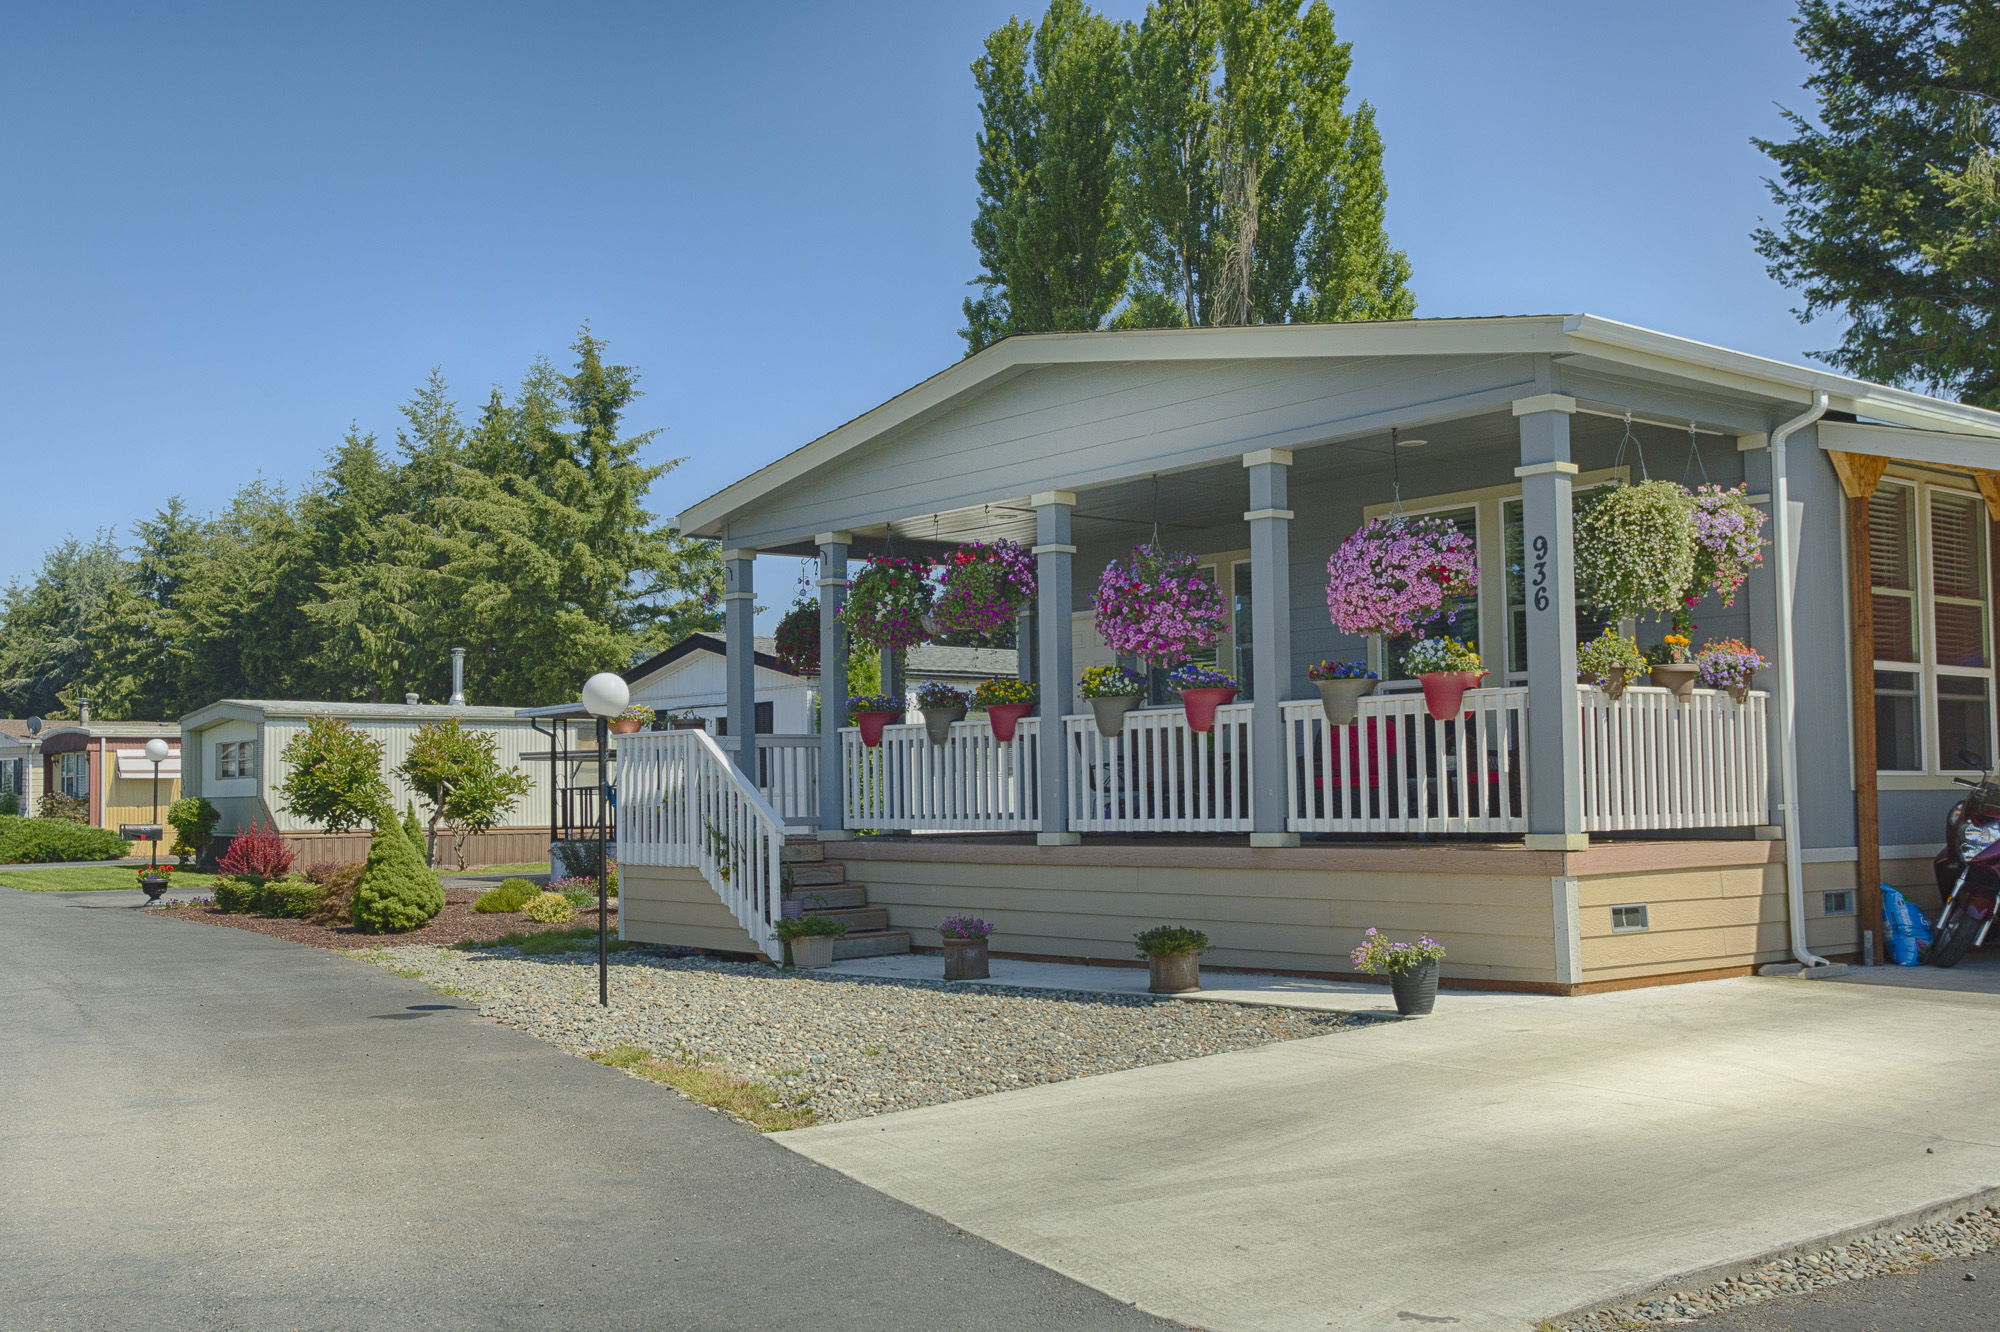 Beautiful manufactured home with large covered front porch. Colorful potted flowers hang around the perimeter of the porch.